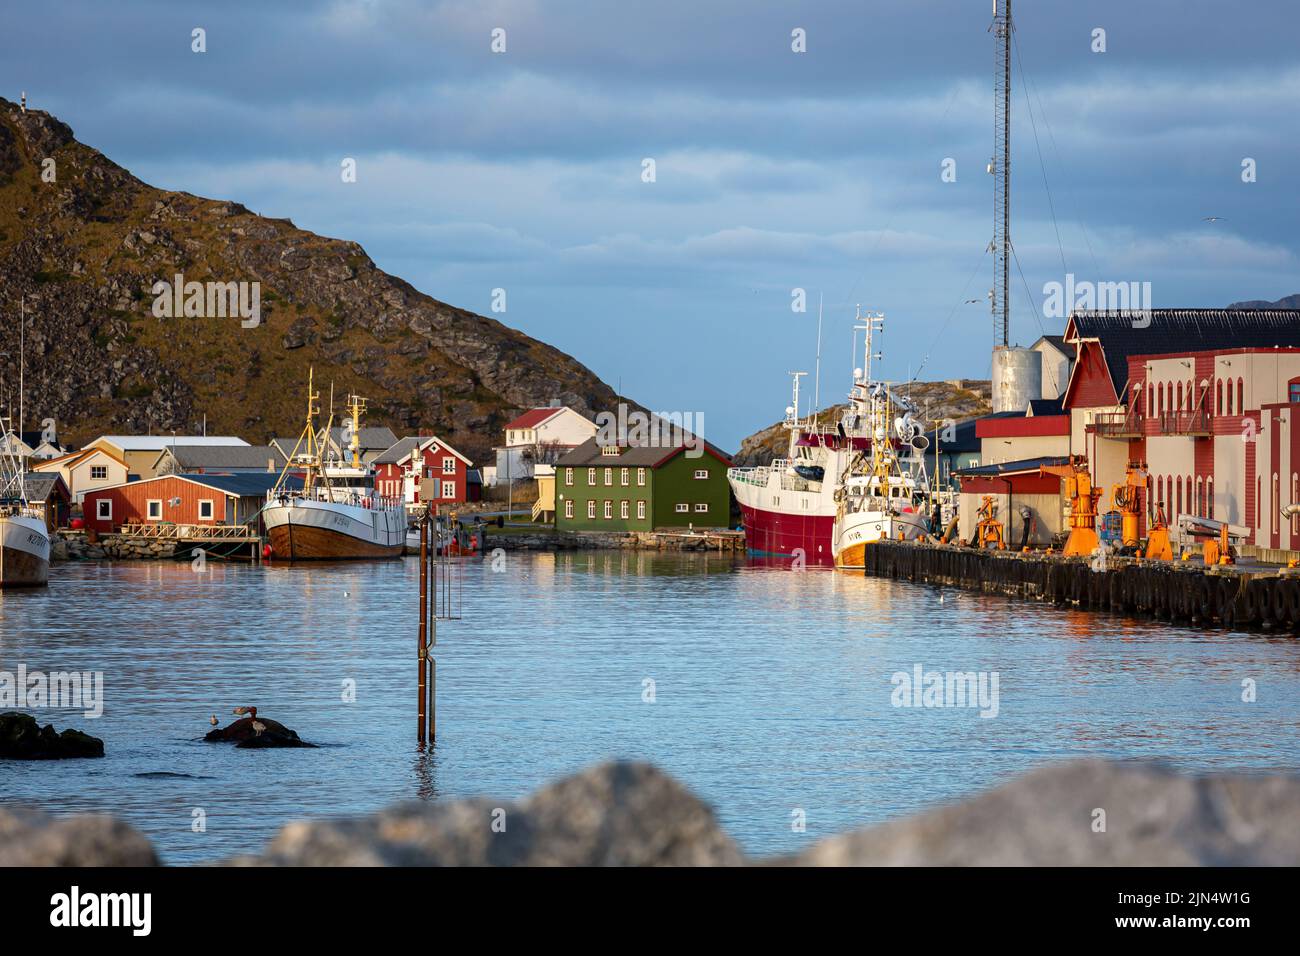 The view of colorful buildings and boats by the lake under the blue cloudy sky in the Lofoten village Stock Photo